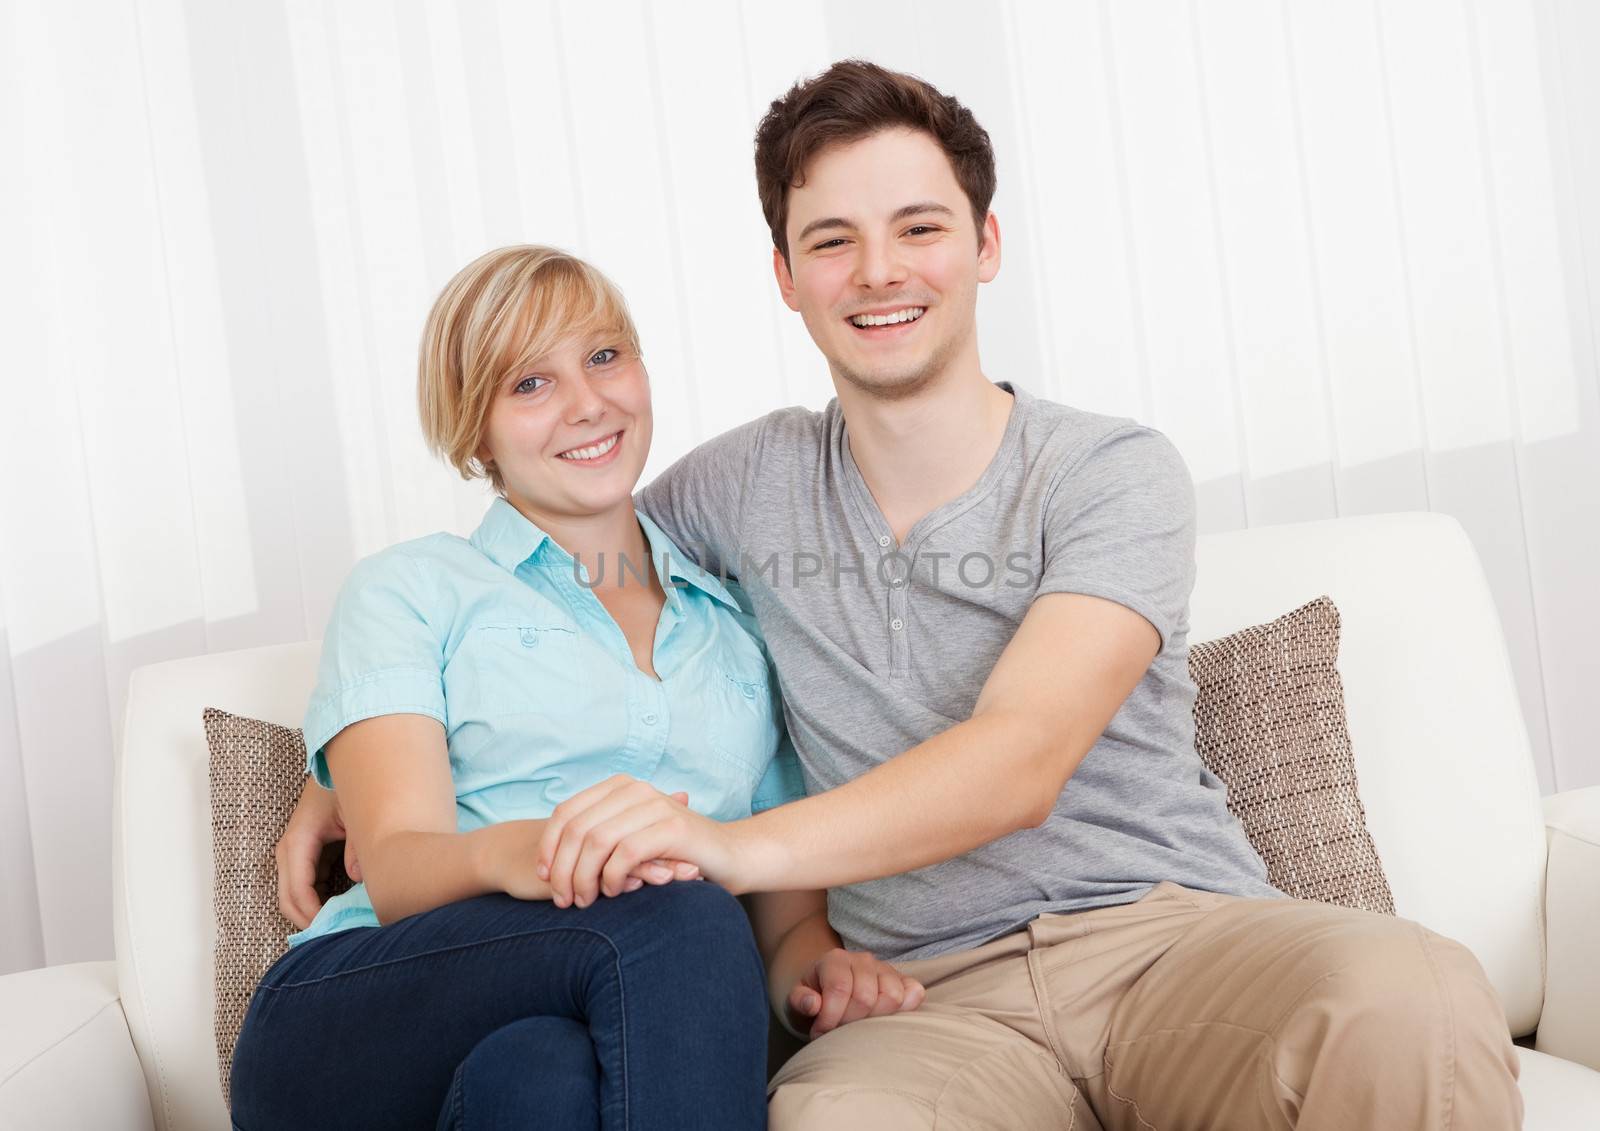 Smiling loving attractive young couple sitting close together relaxing on a sofa